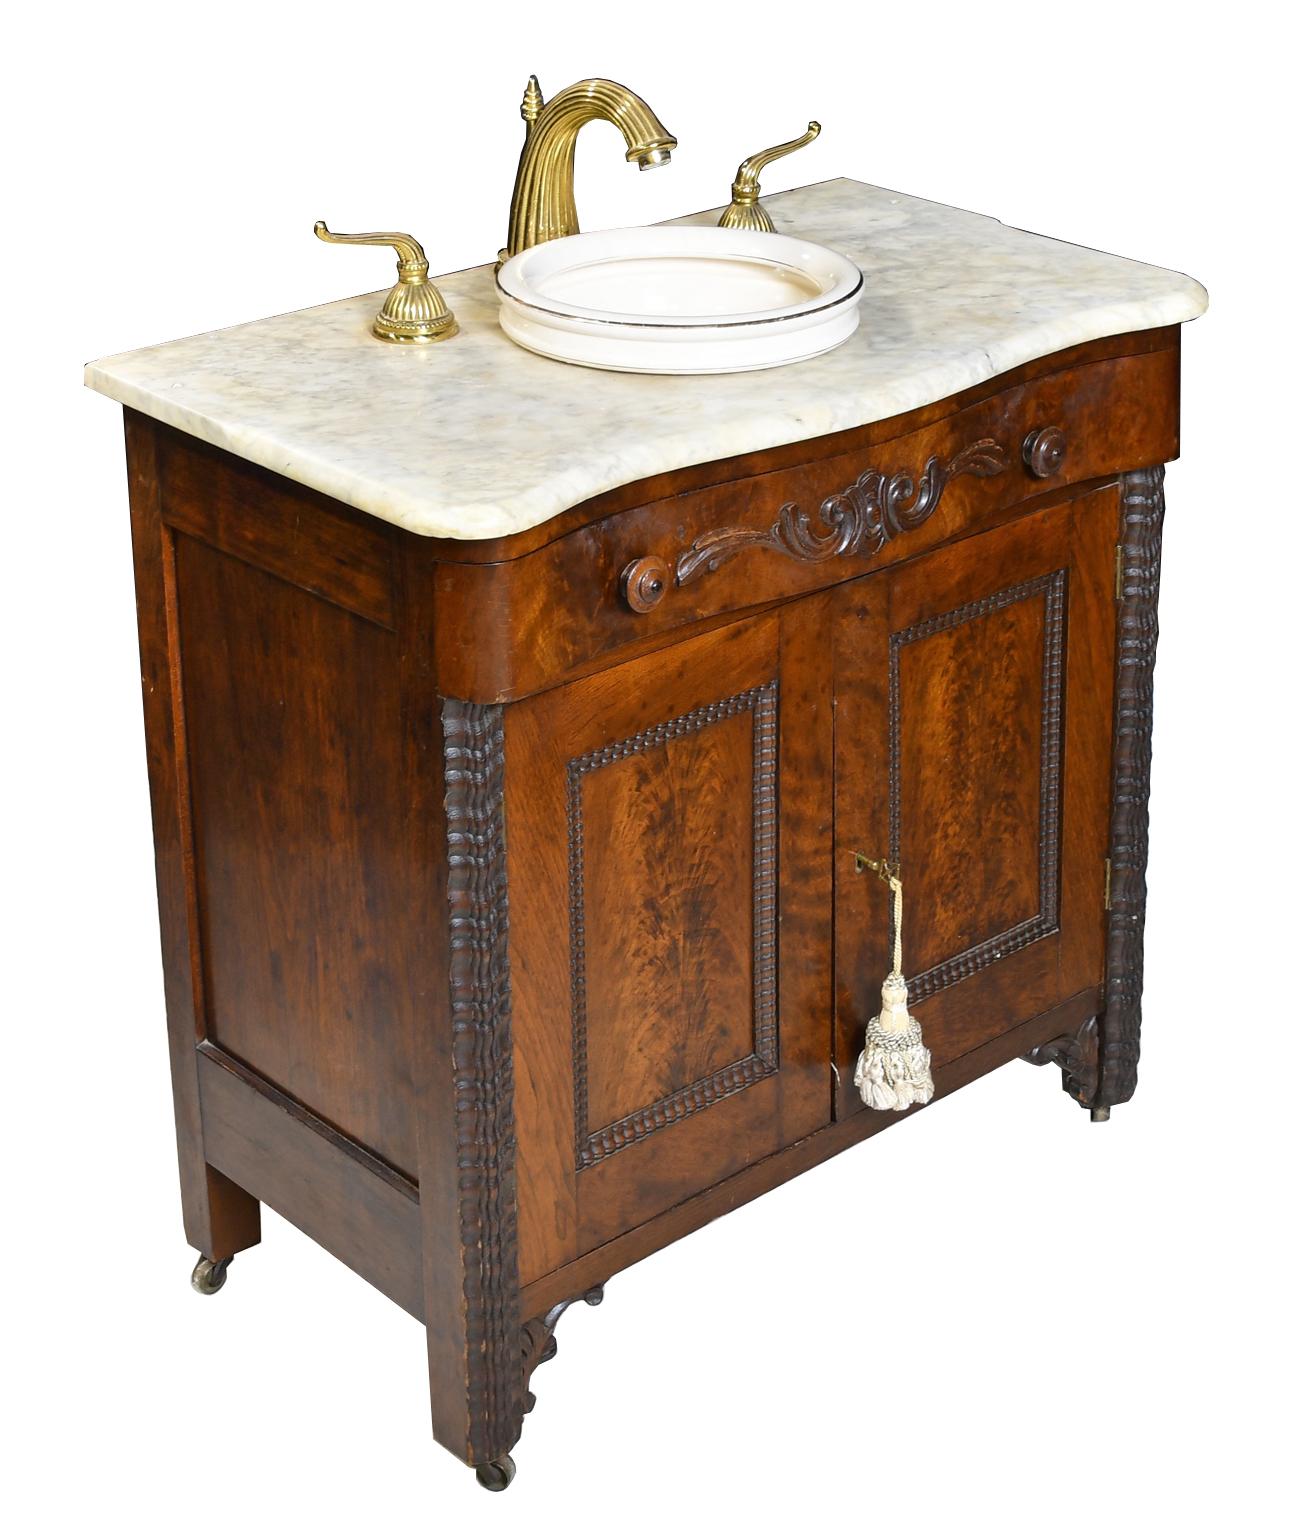 Brass Antique Victorian Walnut Cabinet w/ White Marble Top Adapted with Sink & Faucet